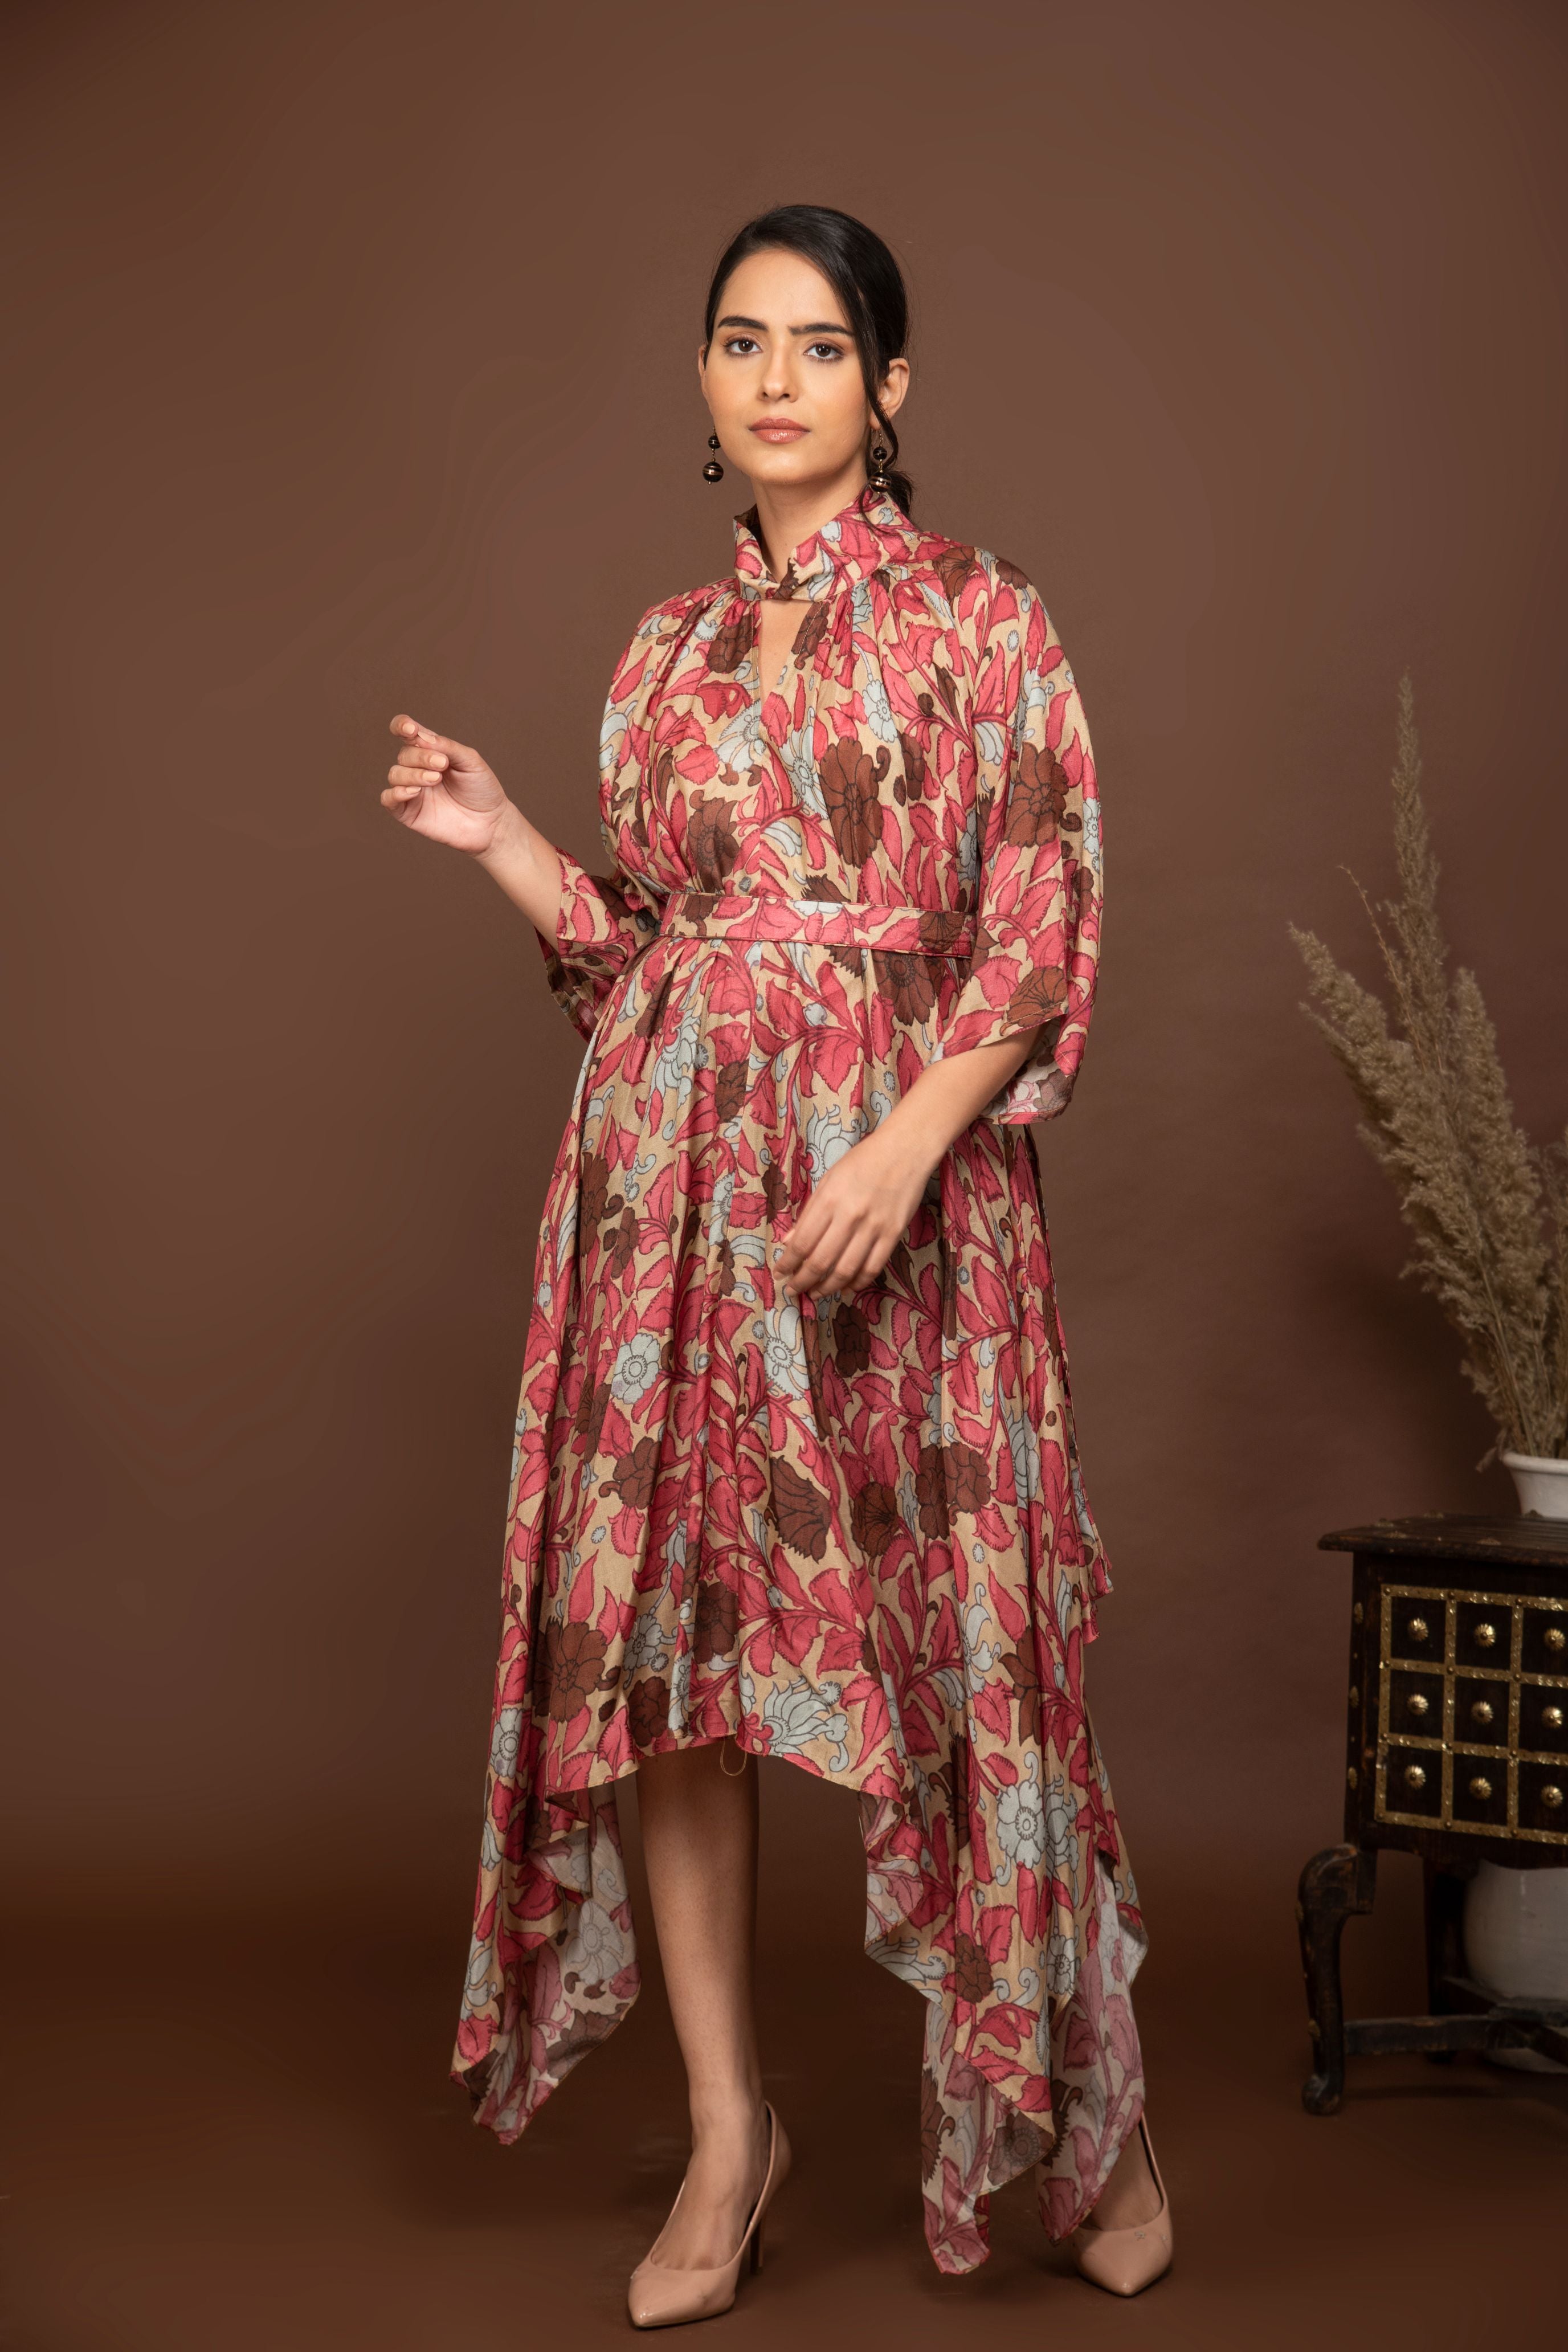 Brown soft muslin bold prints high-low dress with tie up belt.